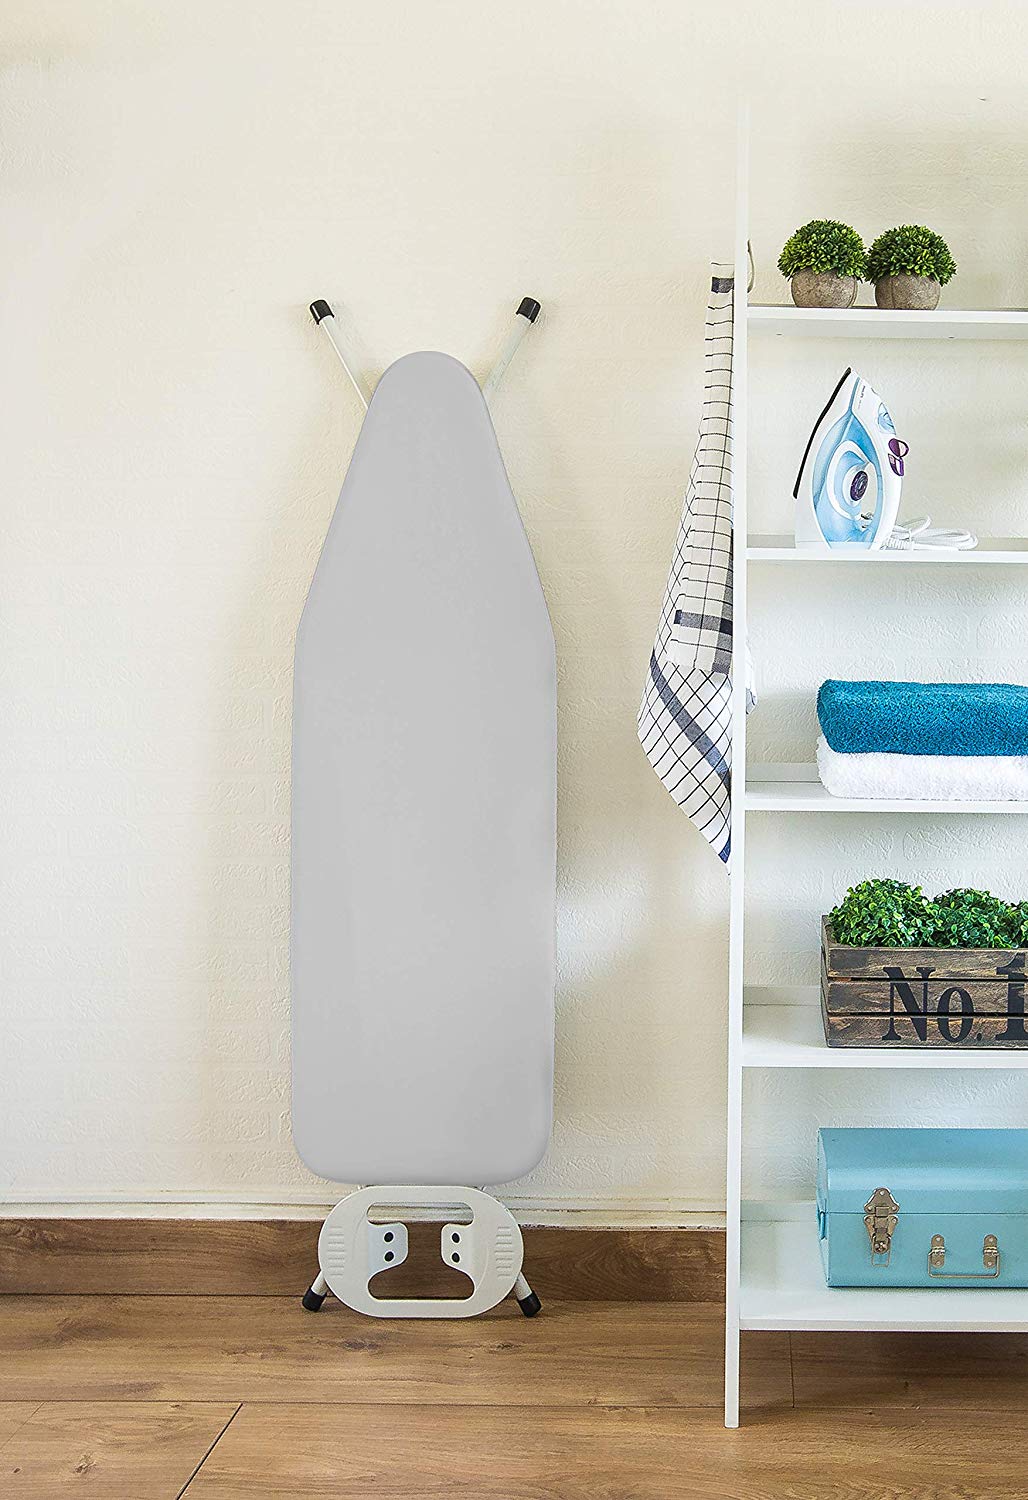 Encasa Homes Metallised Ironing Board Cover 'Silver Super Luxury' with Foam + Felt PAD (Fits Standard Wide Boards "18x49") Heat Reflective, Scorch Resistant, Bungee Elasticated, 3 Velcro Fasteners